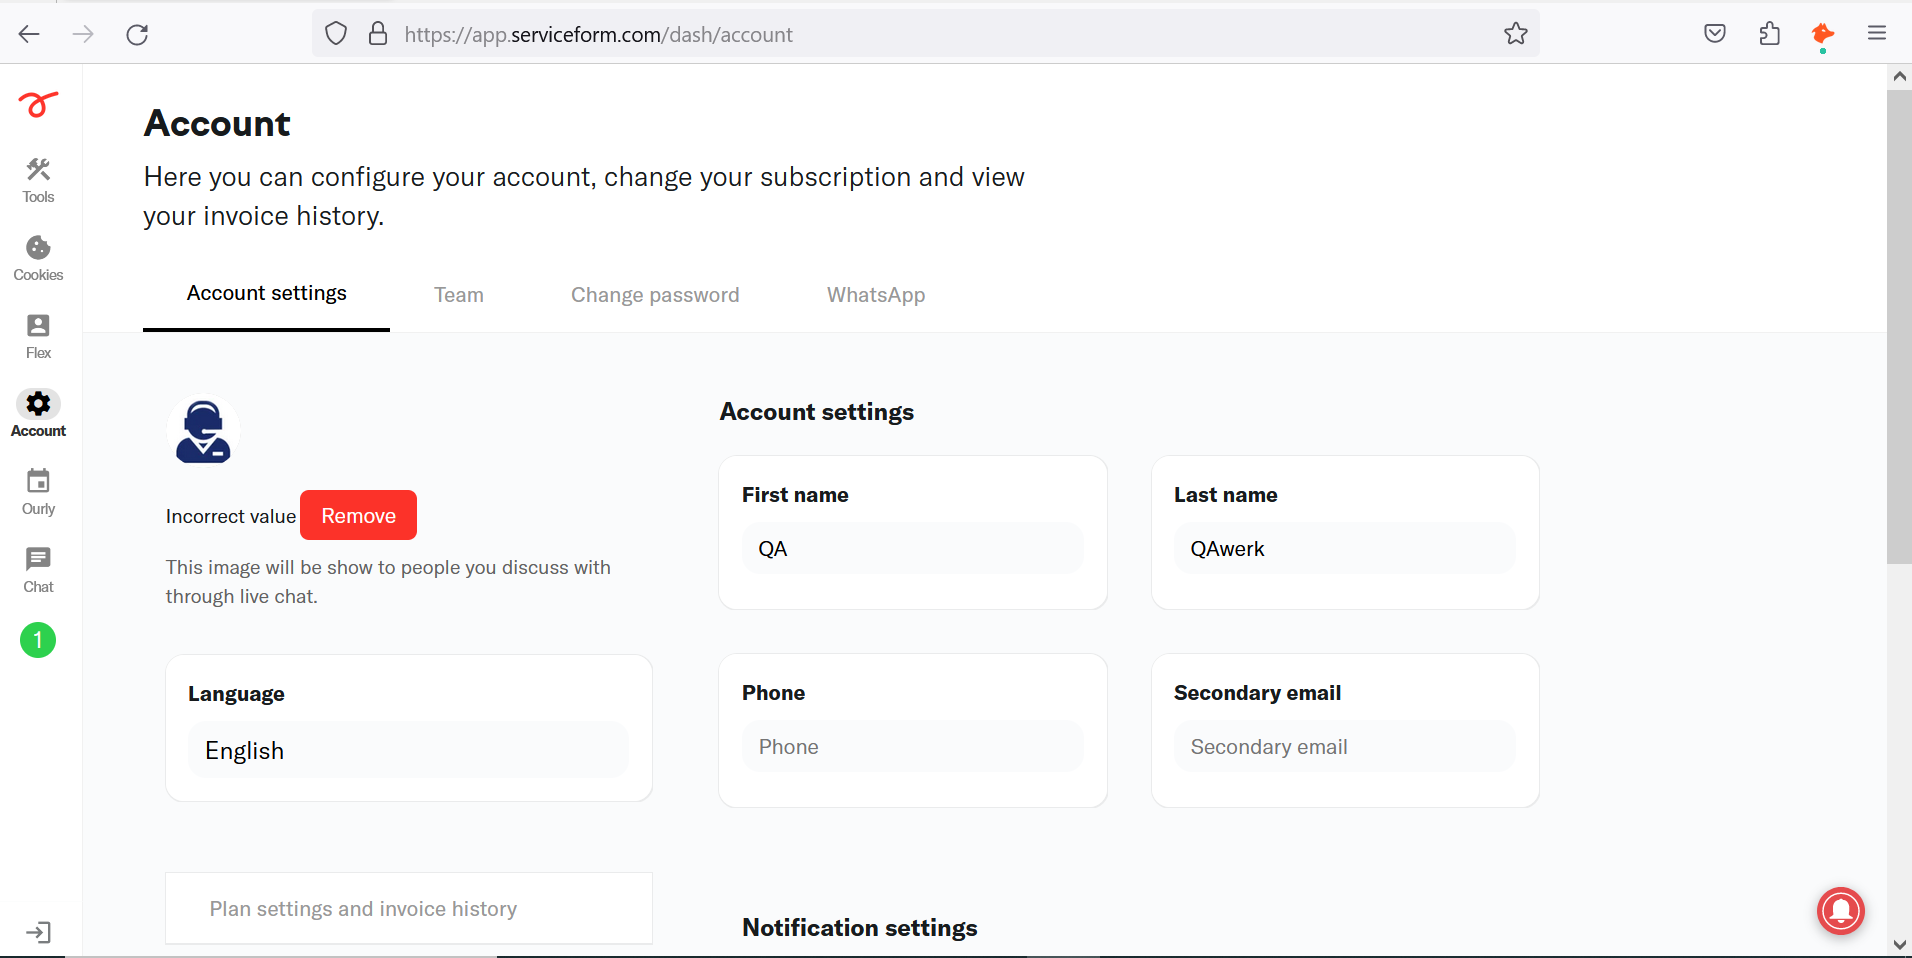 By default, account settings display Incorrect value instead of profile picture